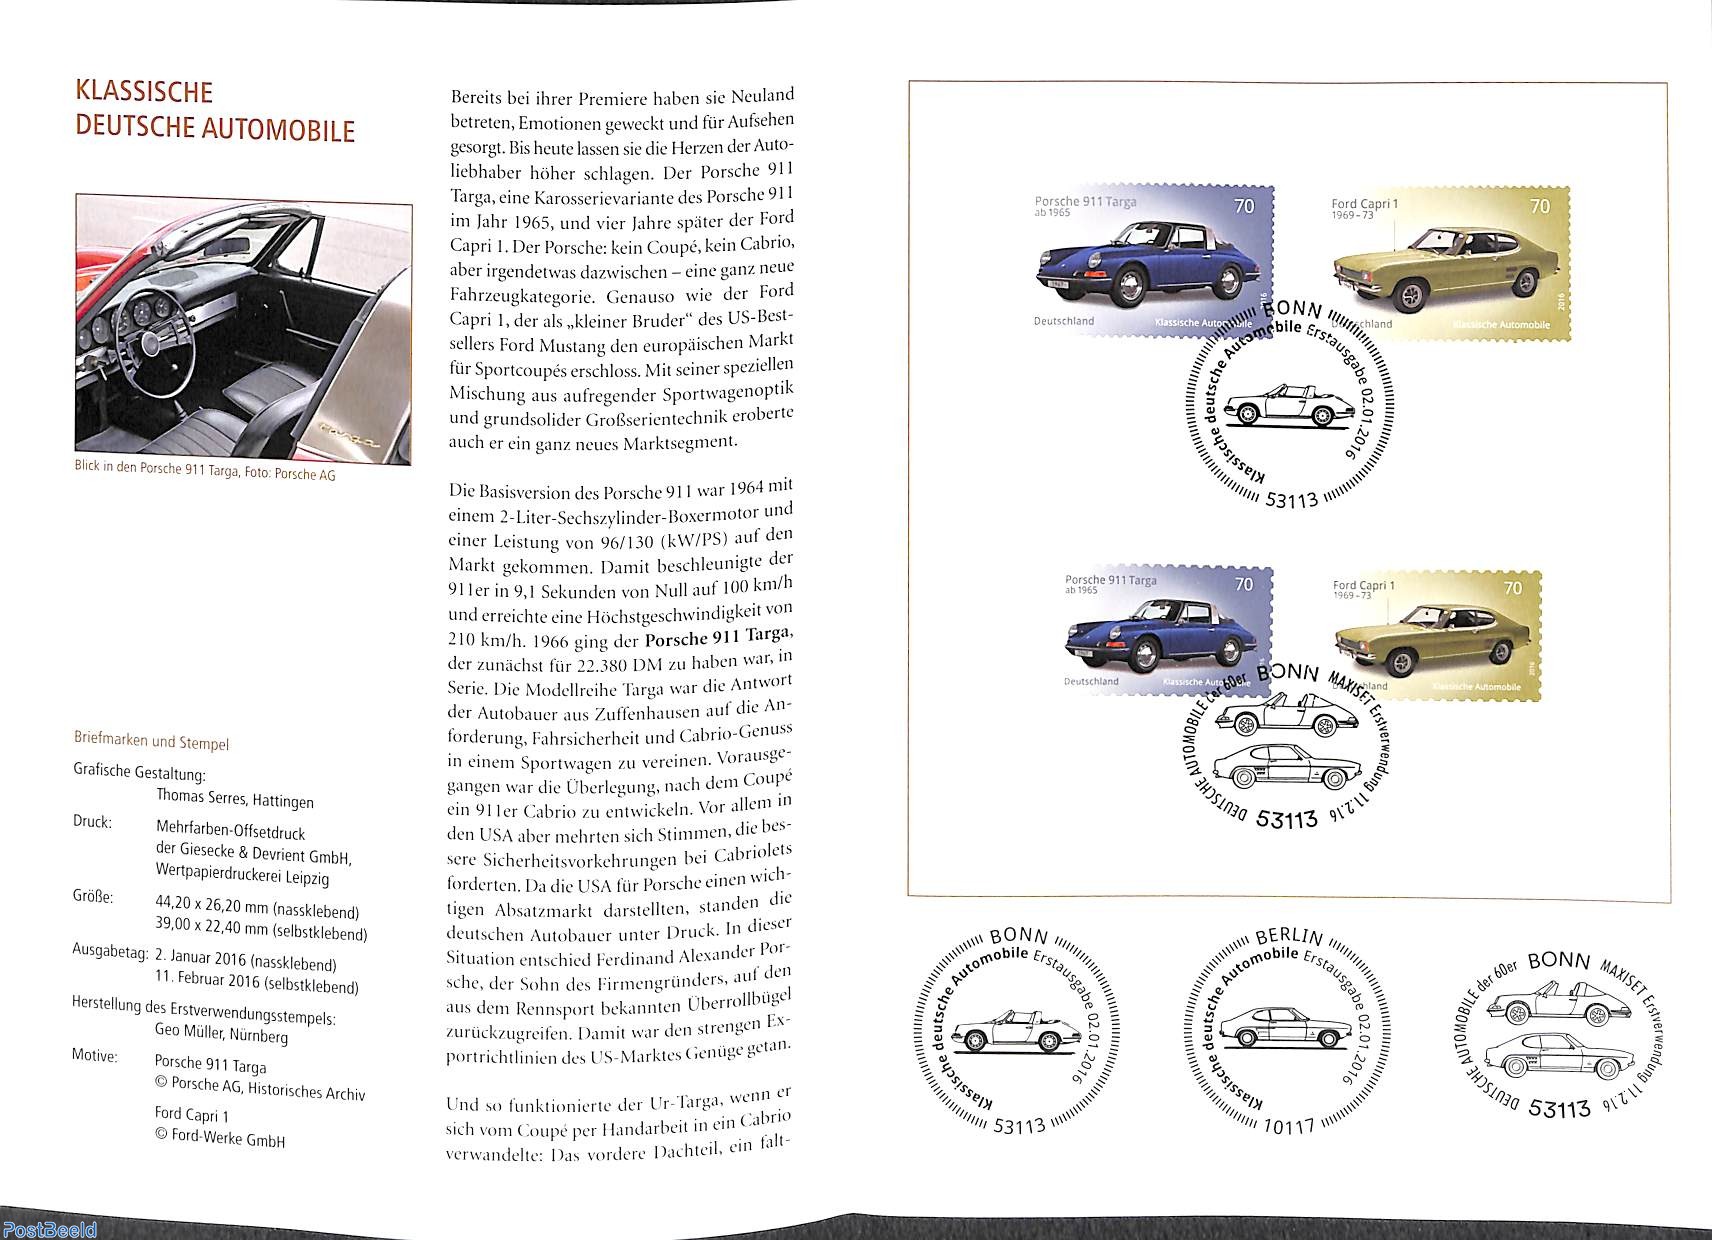 Stamp 2016, Germany, Federal Republic Classic Cars, Porsche 911 & Ford Capri  2v, 2016 - Collecting Stamps - PostBeeld - Online Stamp Shop - Collecting